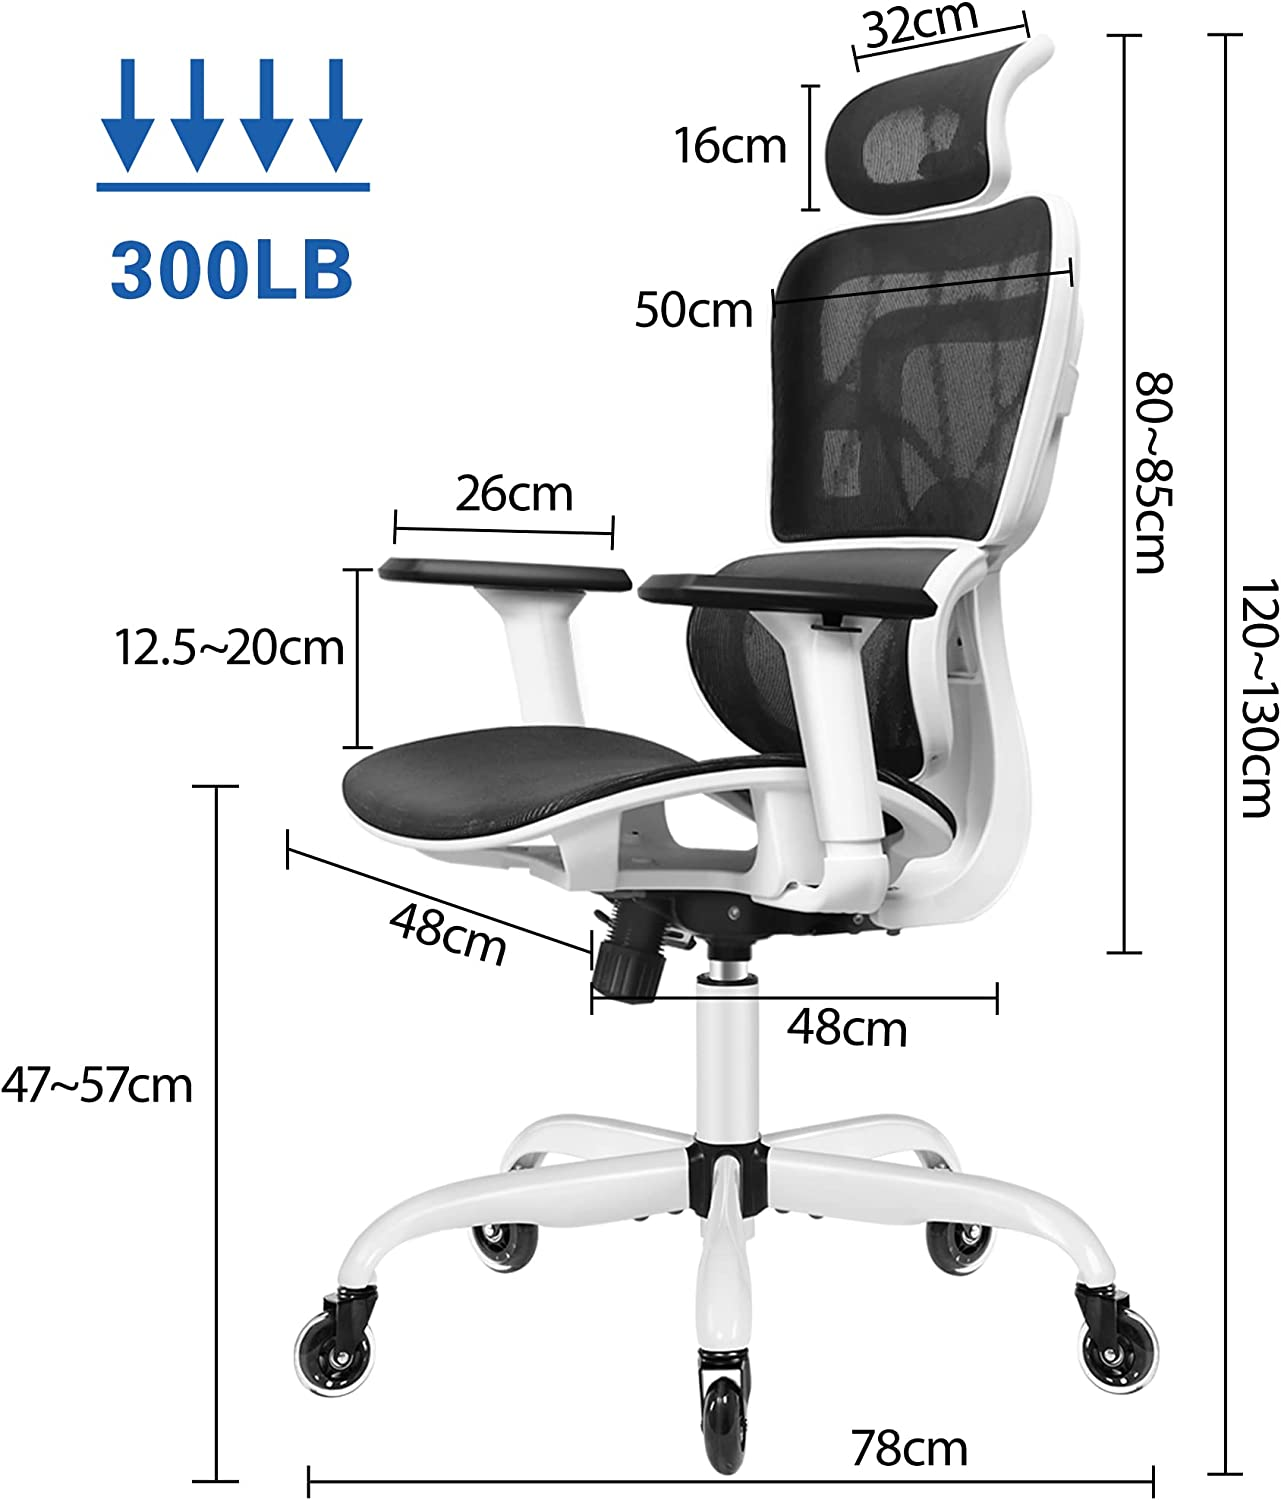 KERDOM | Ergonomic office chair against back pain | With integrated lumbar support